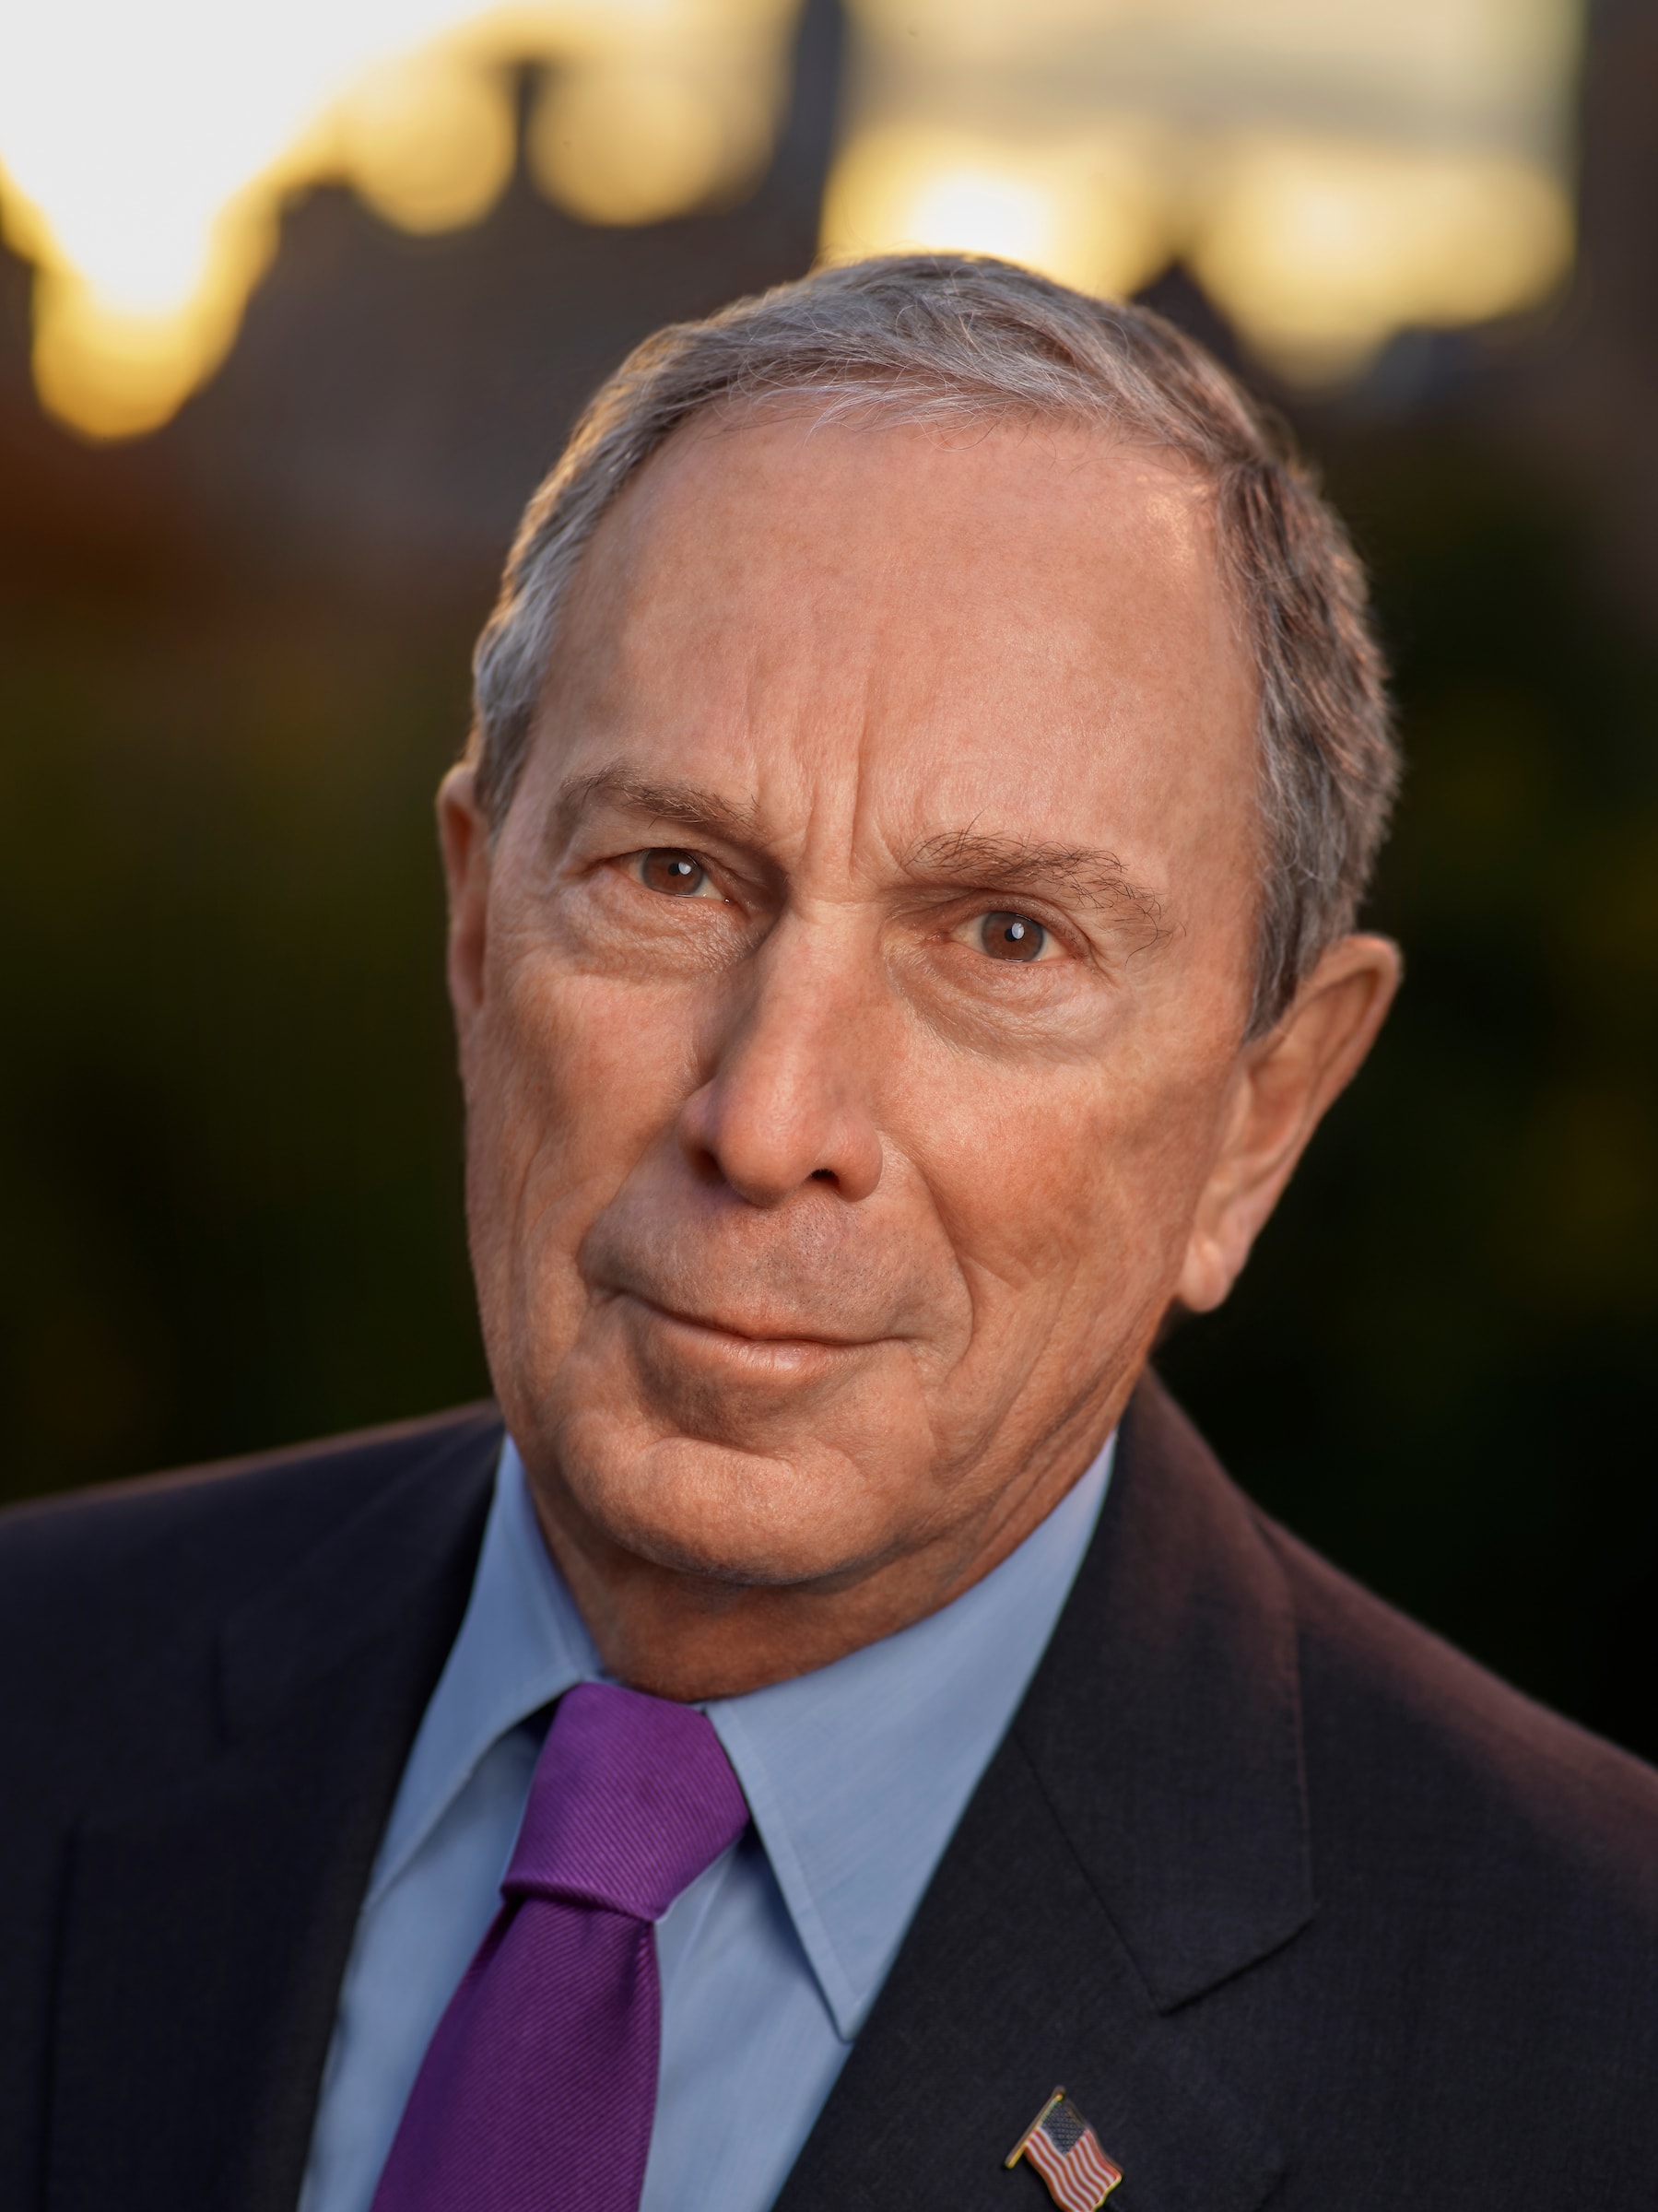 Michael R. Bloomberg, the entrepreneur, philanthropist, former New York City mayor, and chairman of the 9/11 Memorial & Museum, smiles for a portrait photo.